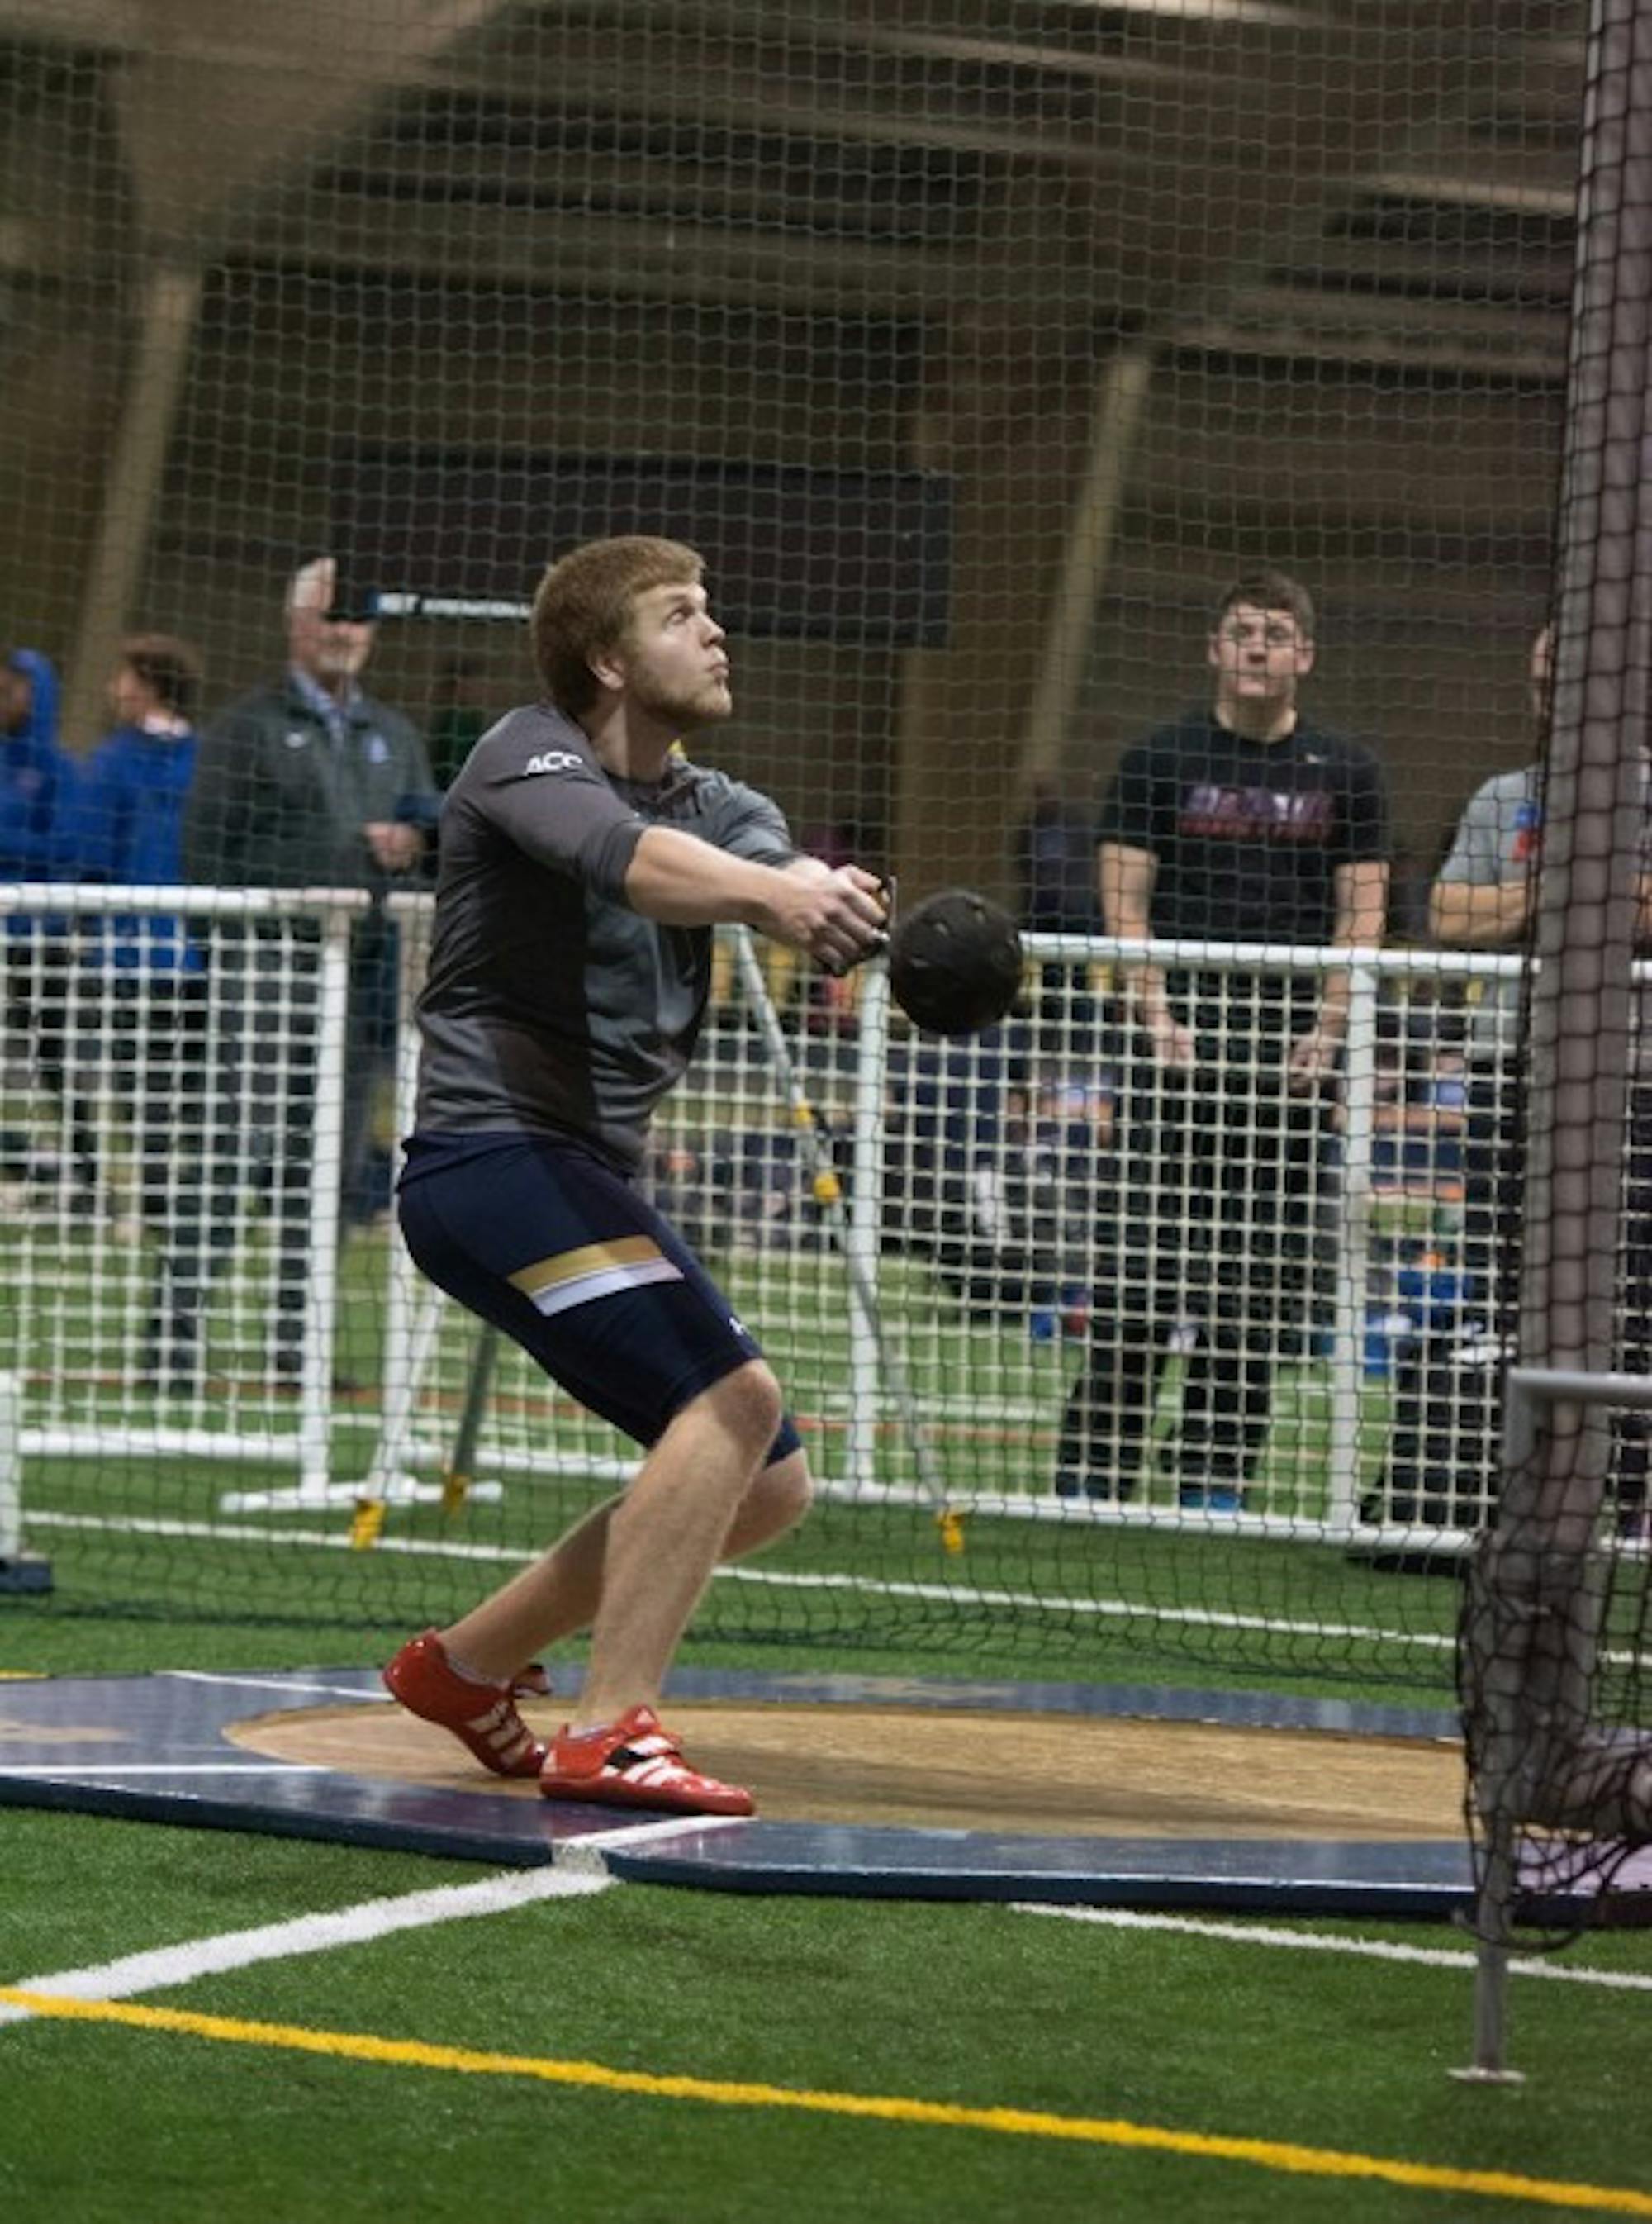 Junior Anthony Shrivers competes in the weight throw during the Meyo Invitational on Feb. 6, 2015 at Loftus Sports Center.